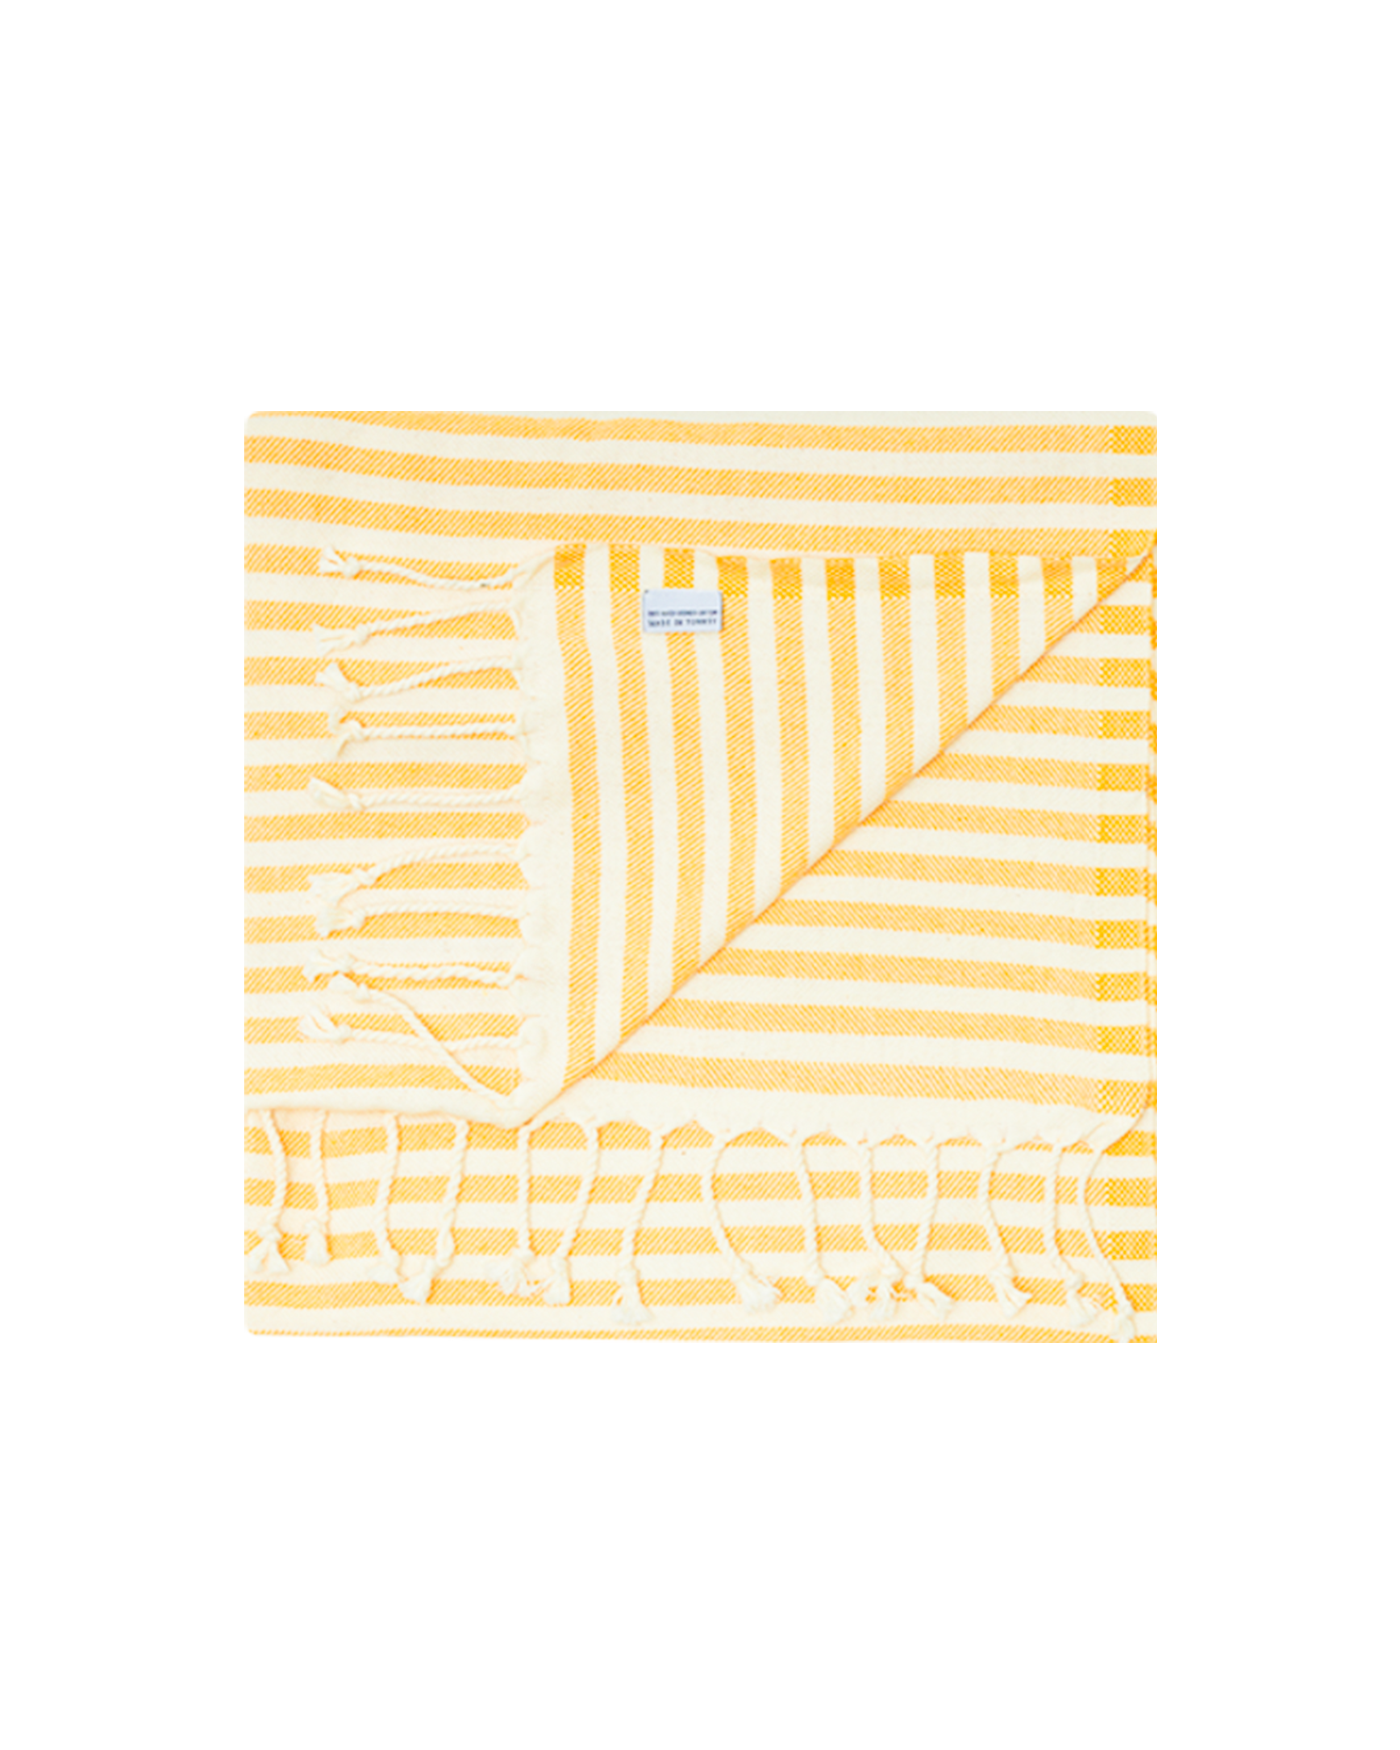 Marbella • Sand Free Beach Towel by Sunkissed